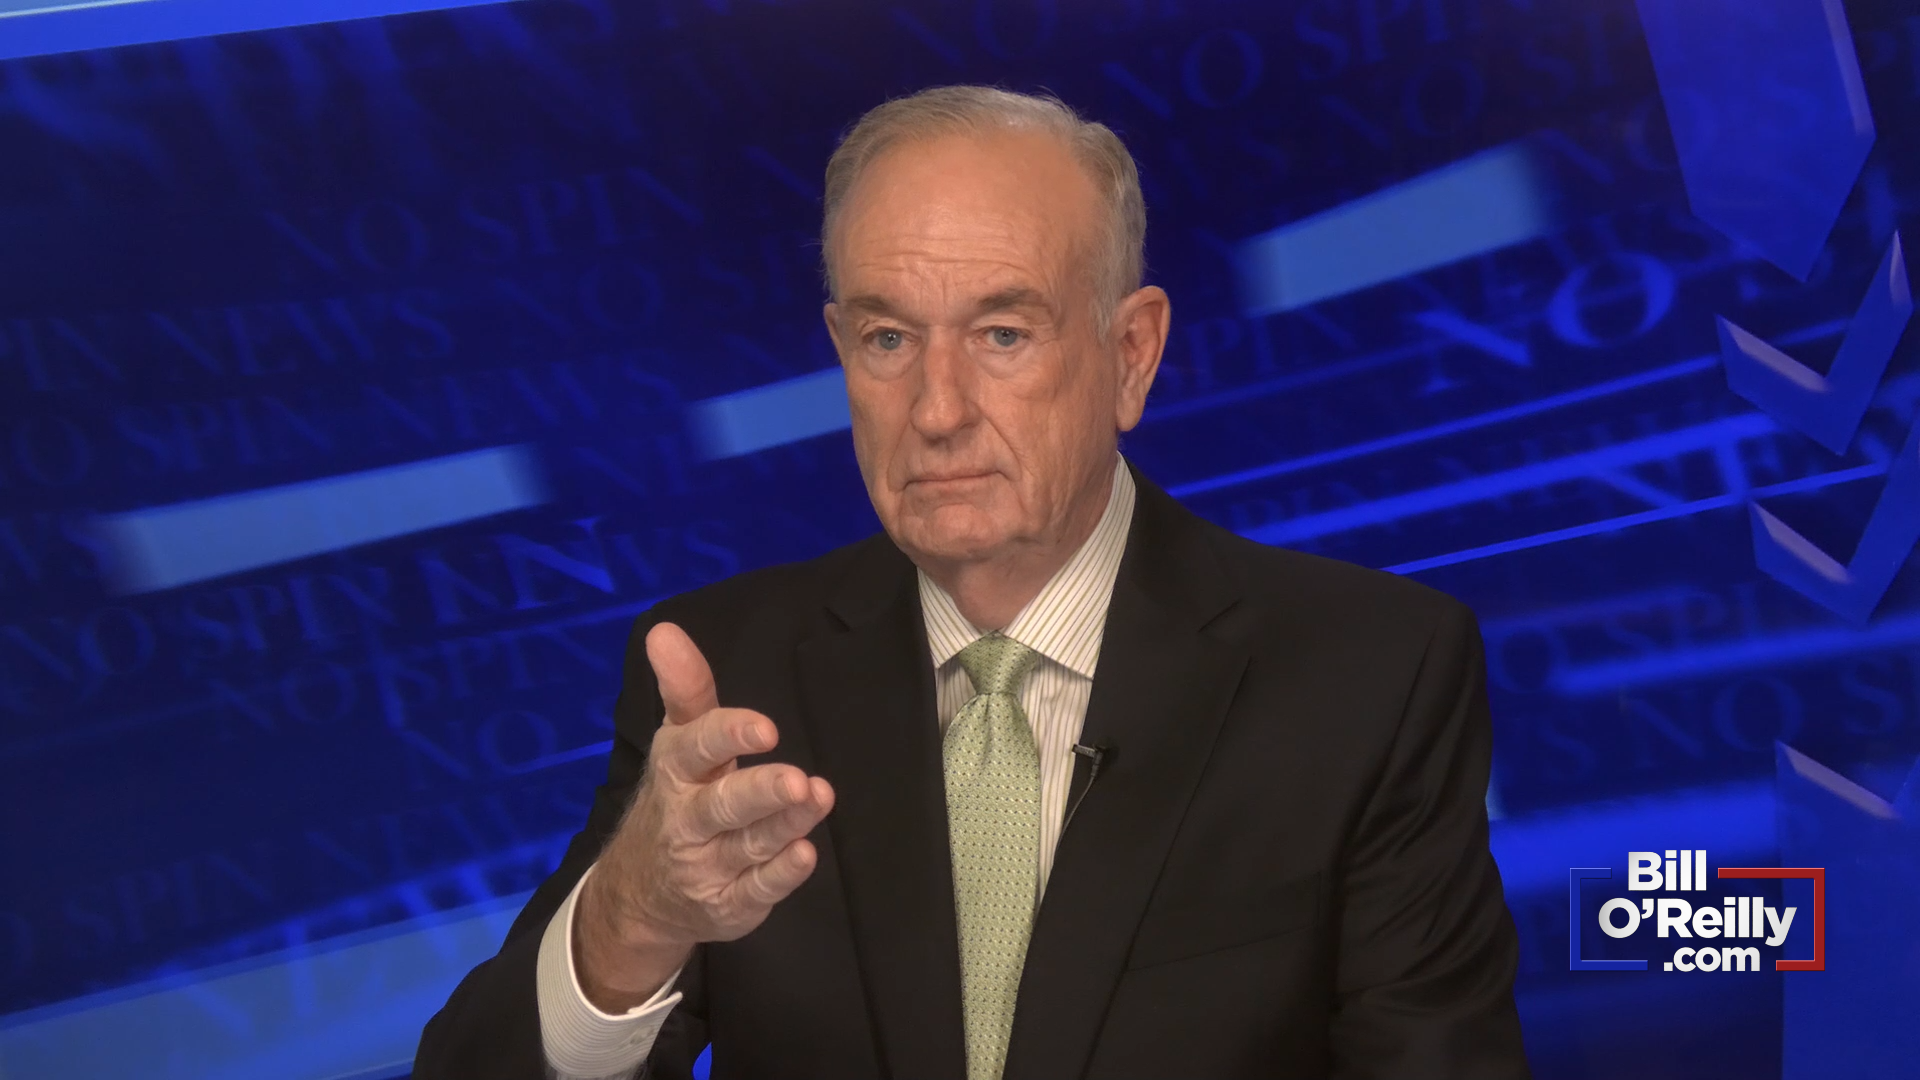 O'Reilly: 'Trump Should Take a Vacation'